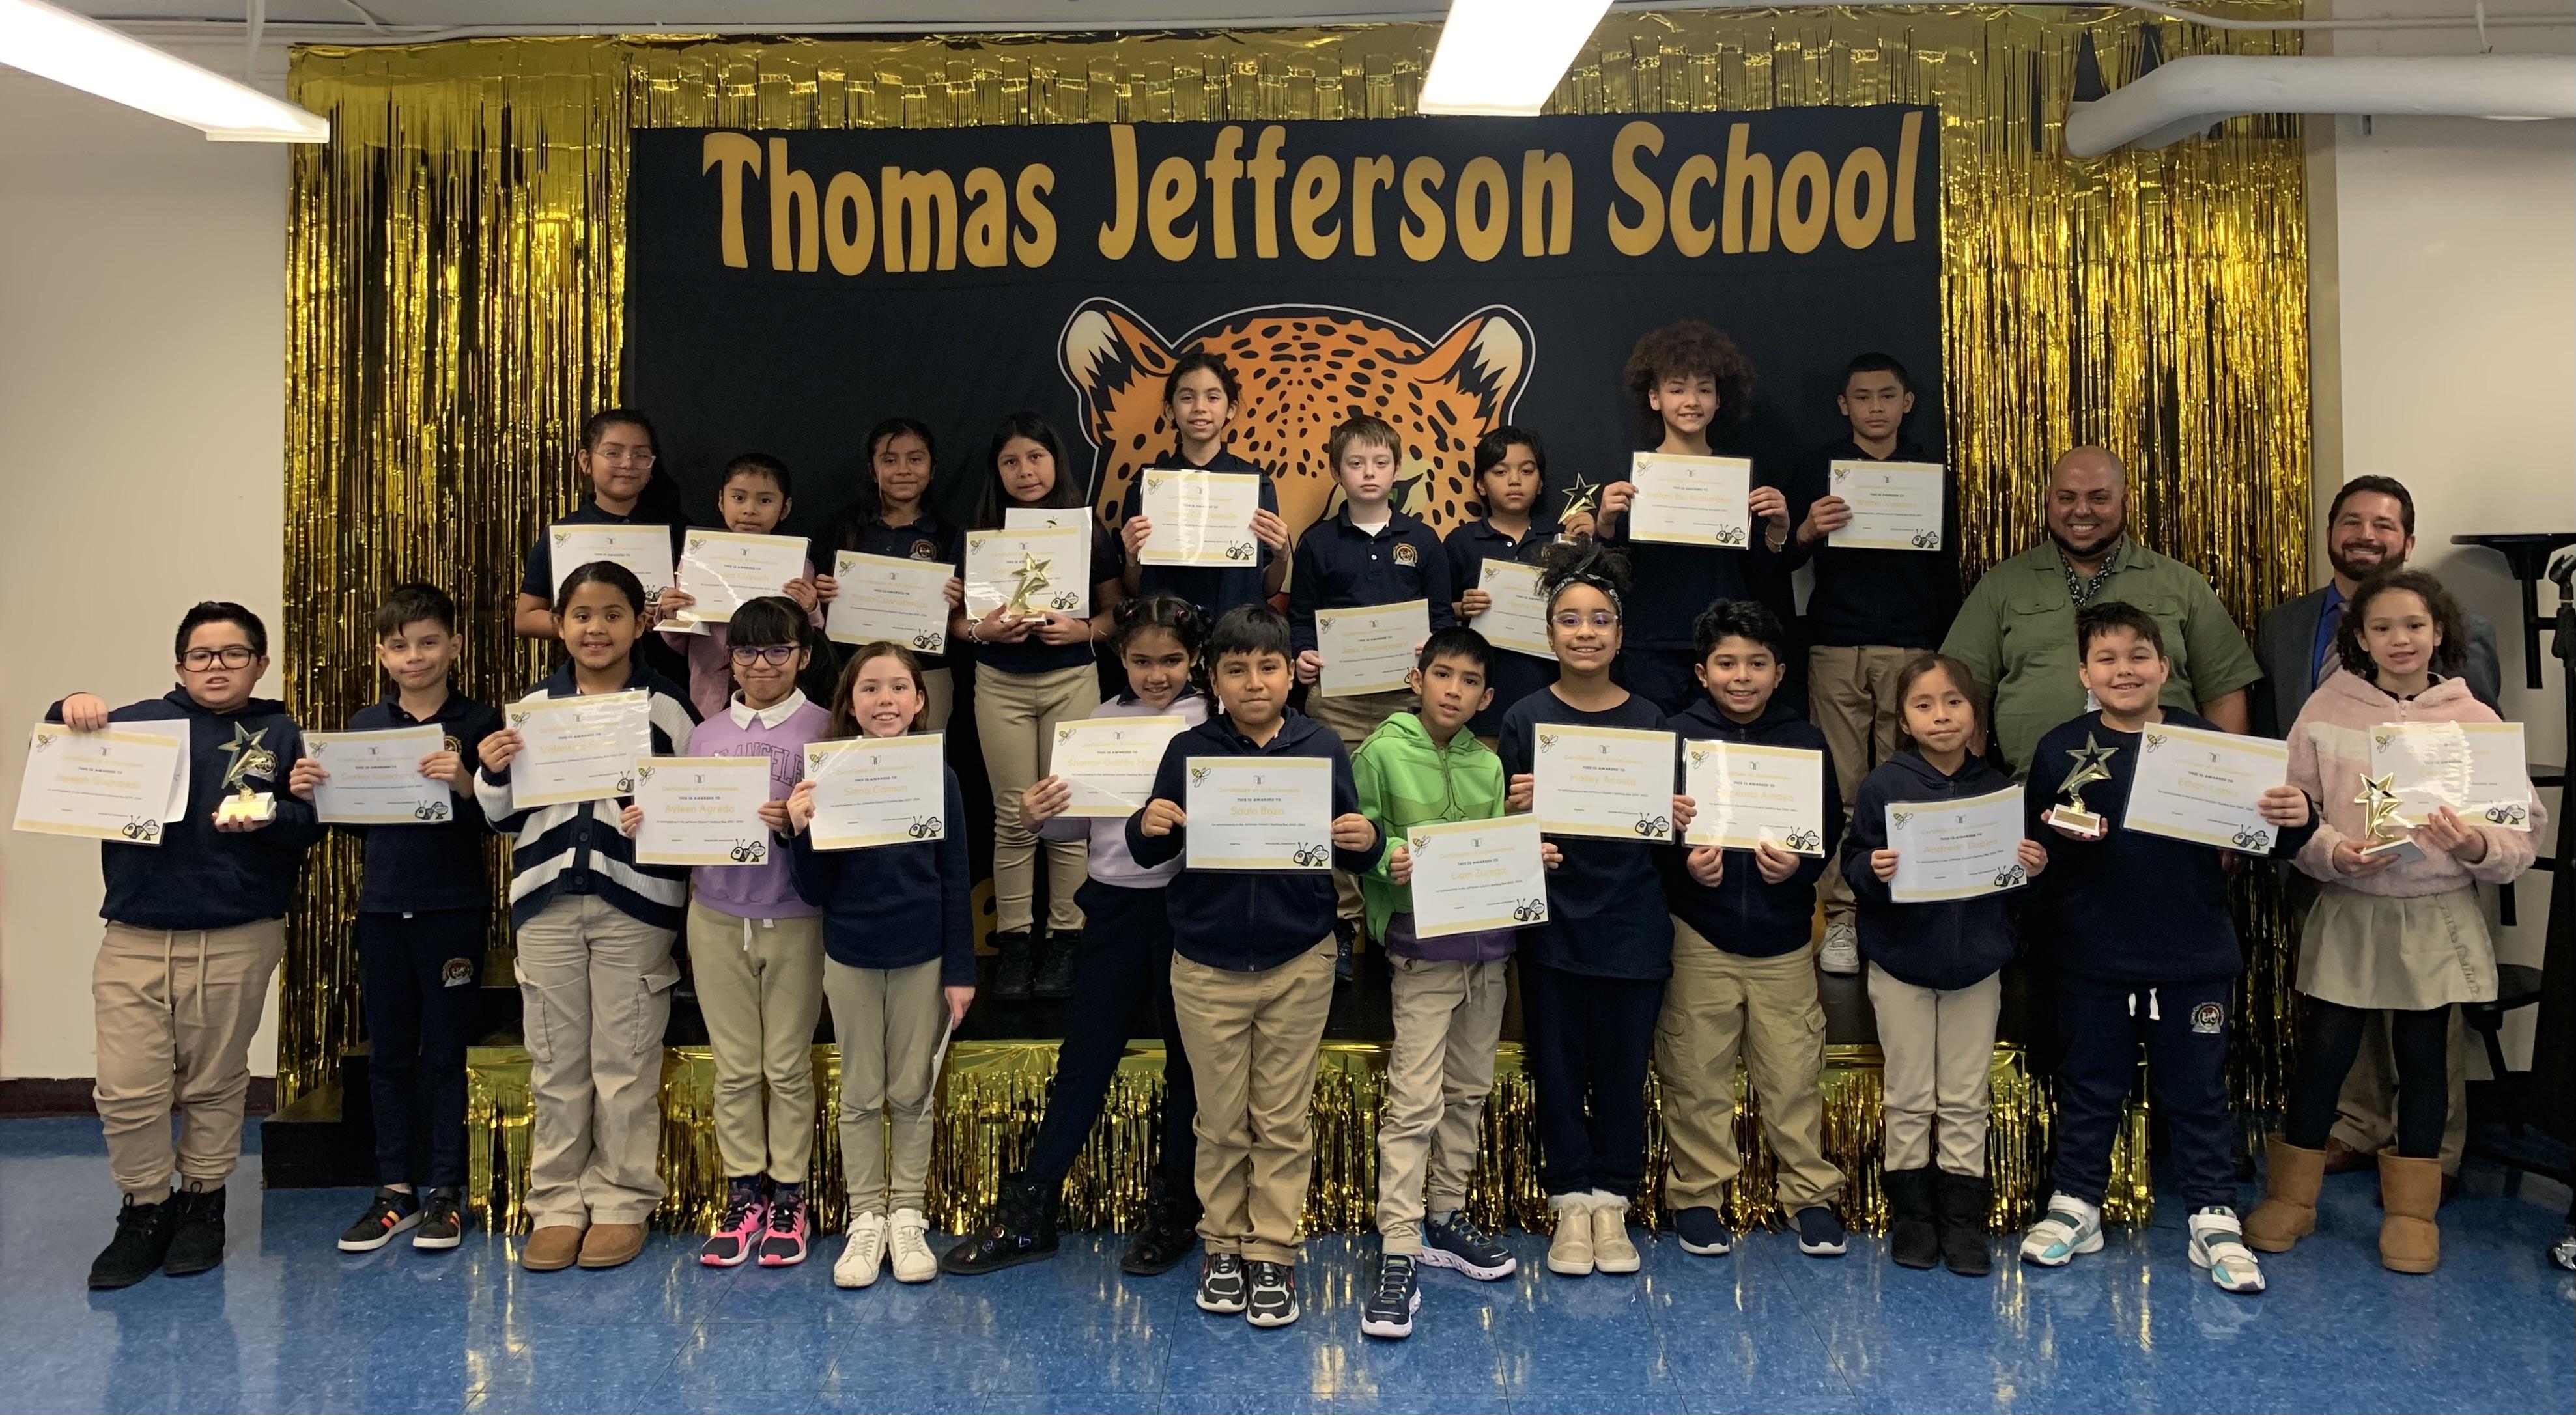 An Exciting Spelling Bee at the Jefferson School